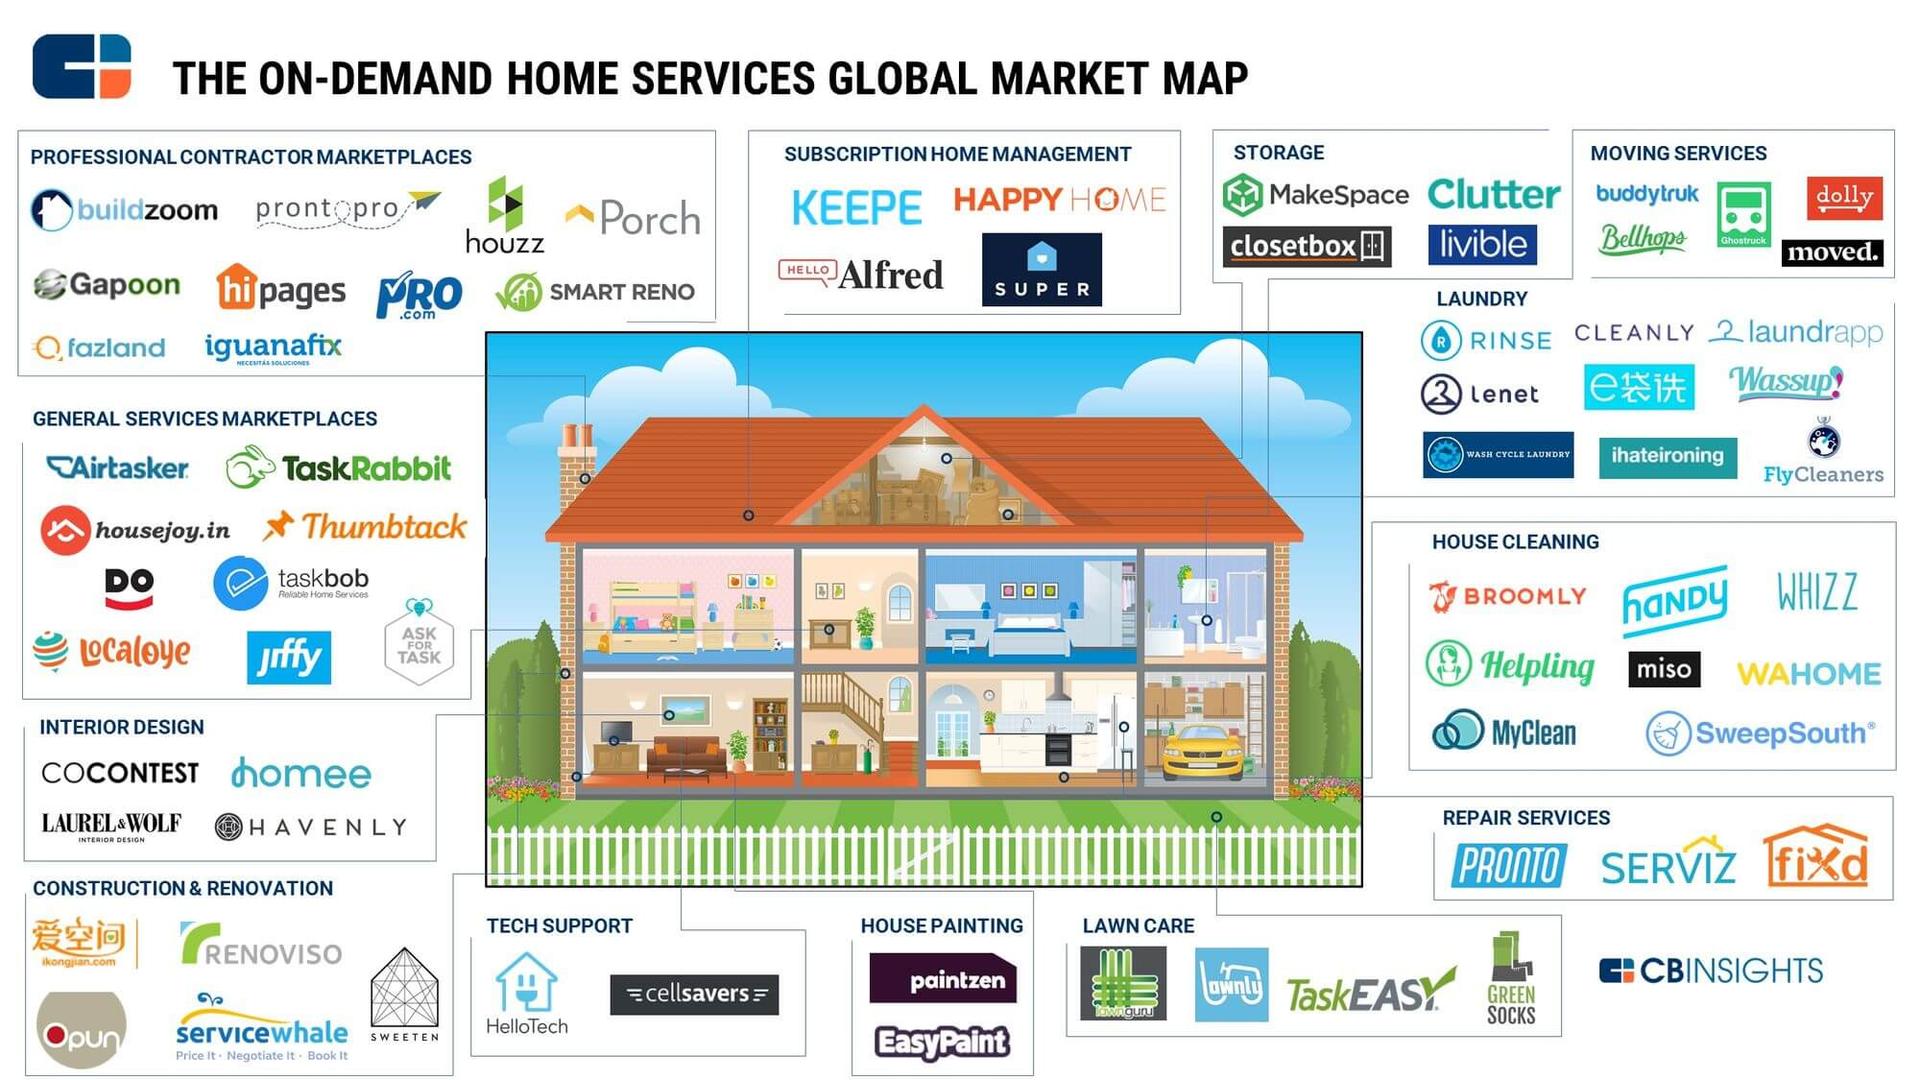 On demand home services market